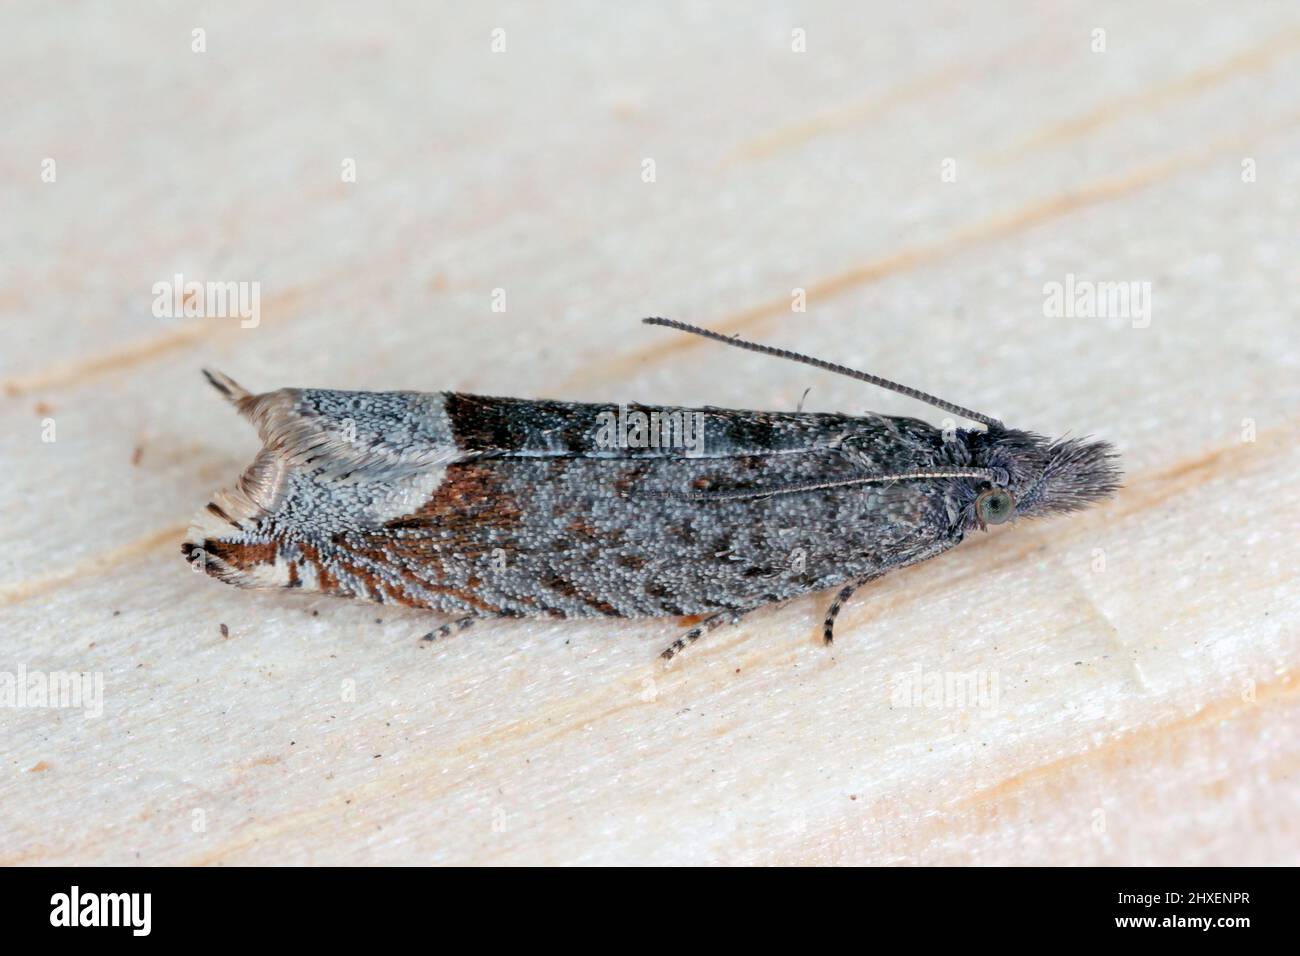 Ancylis tineana is a moth of the family Tortricidae. Larvae - caterpillars can become a pest in orchards and gardens. Stock Photo